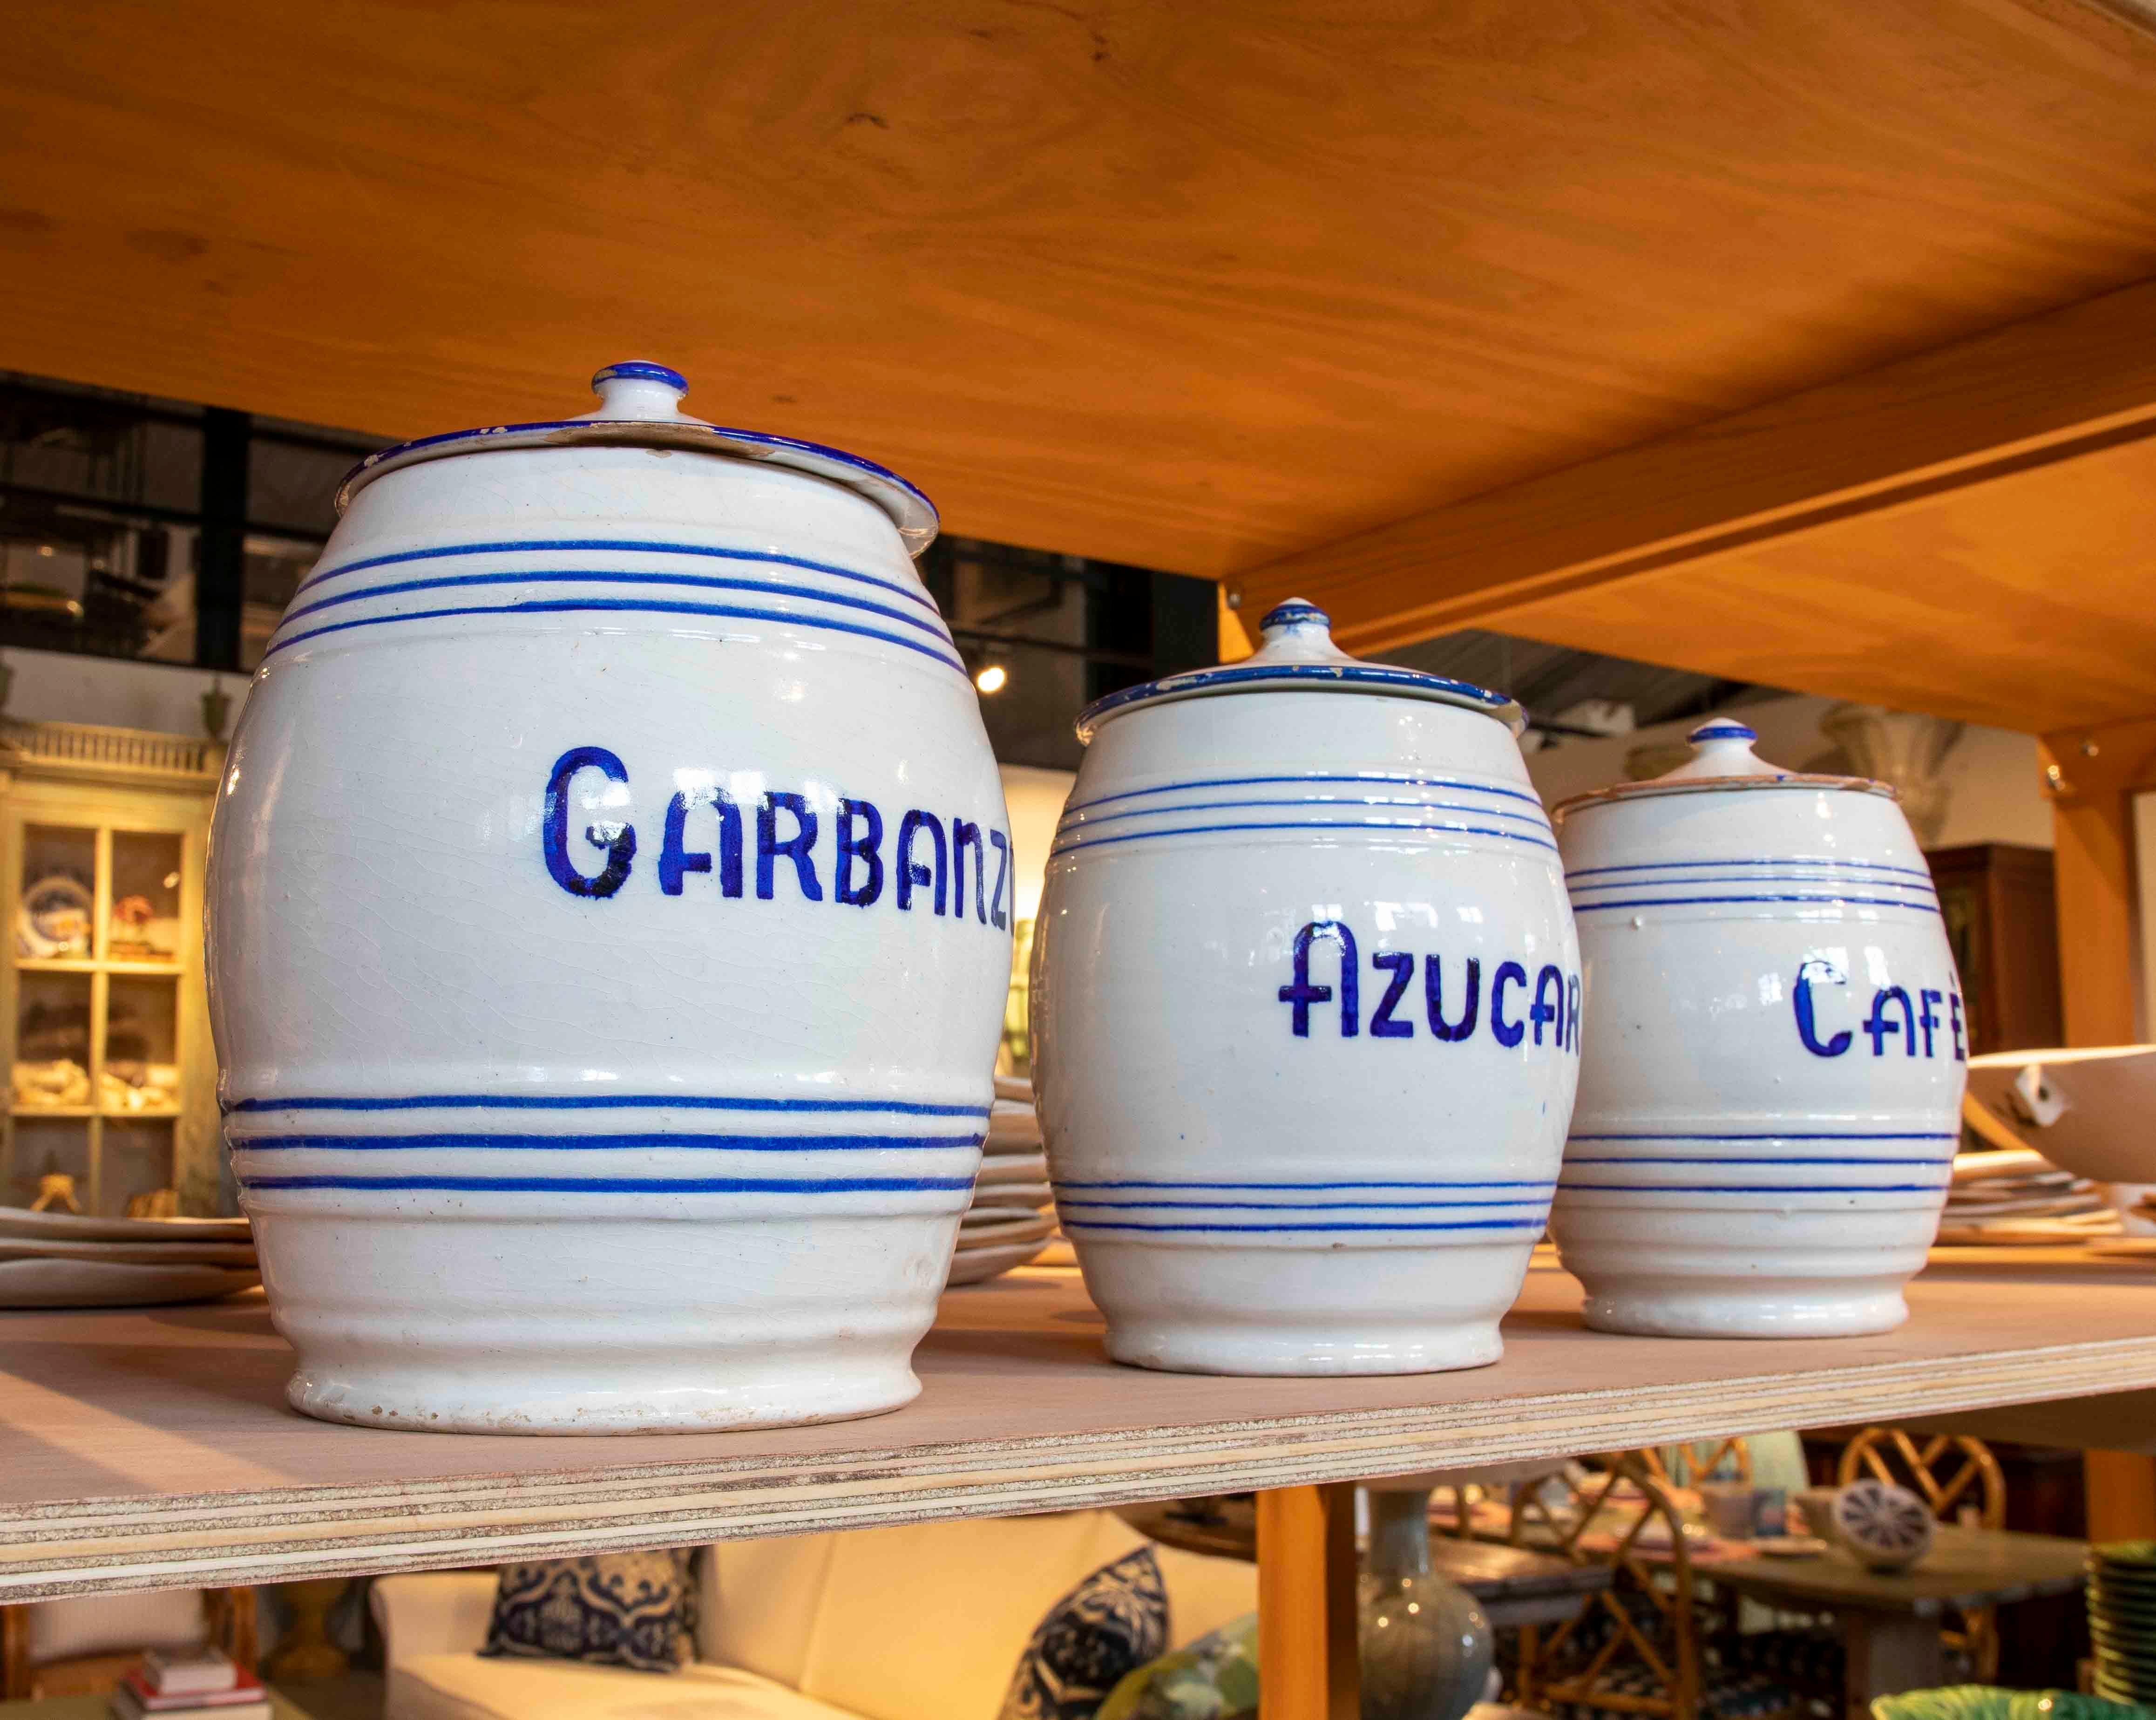 Spanish Set of Ceramic Jars with Lids for Storing Vegetables, Sugar and Coffee